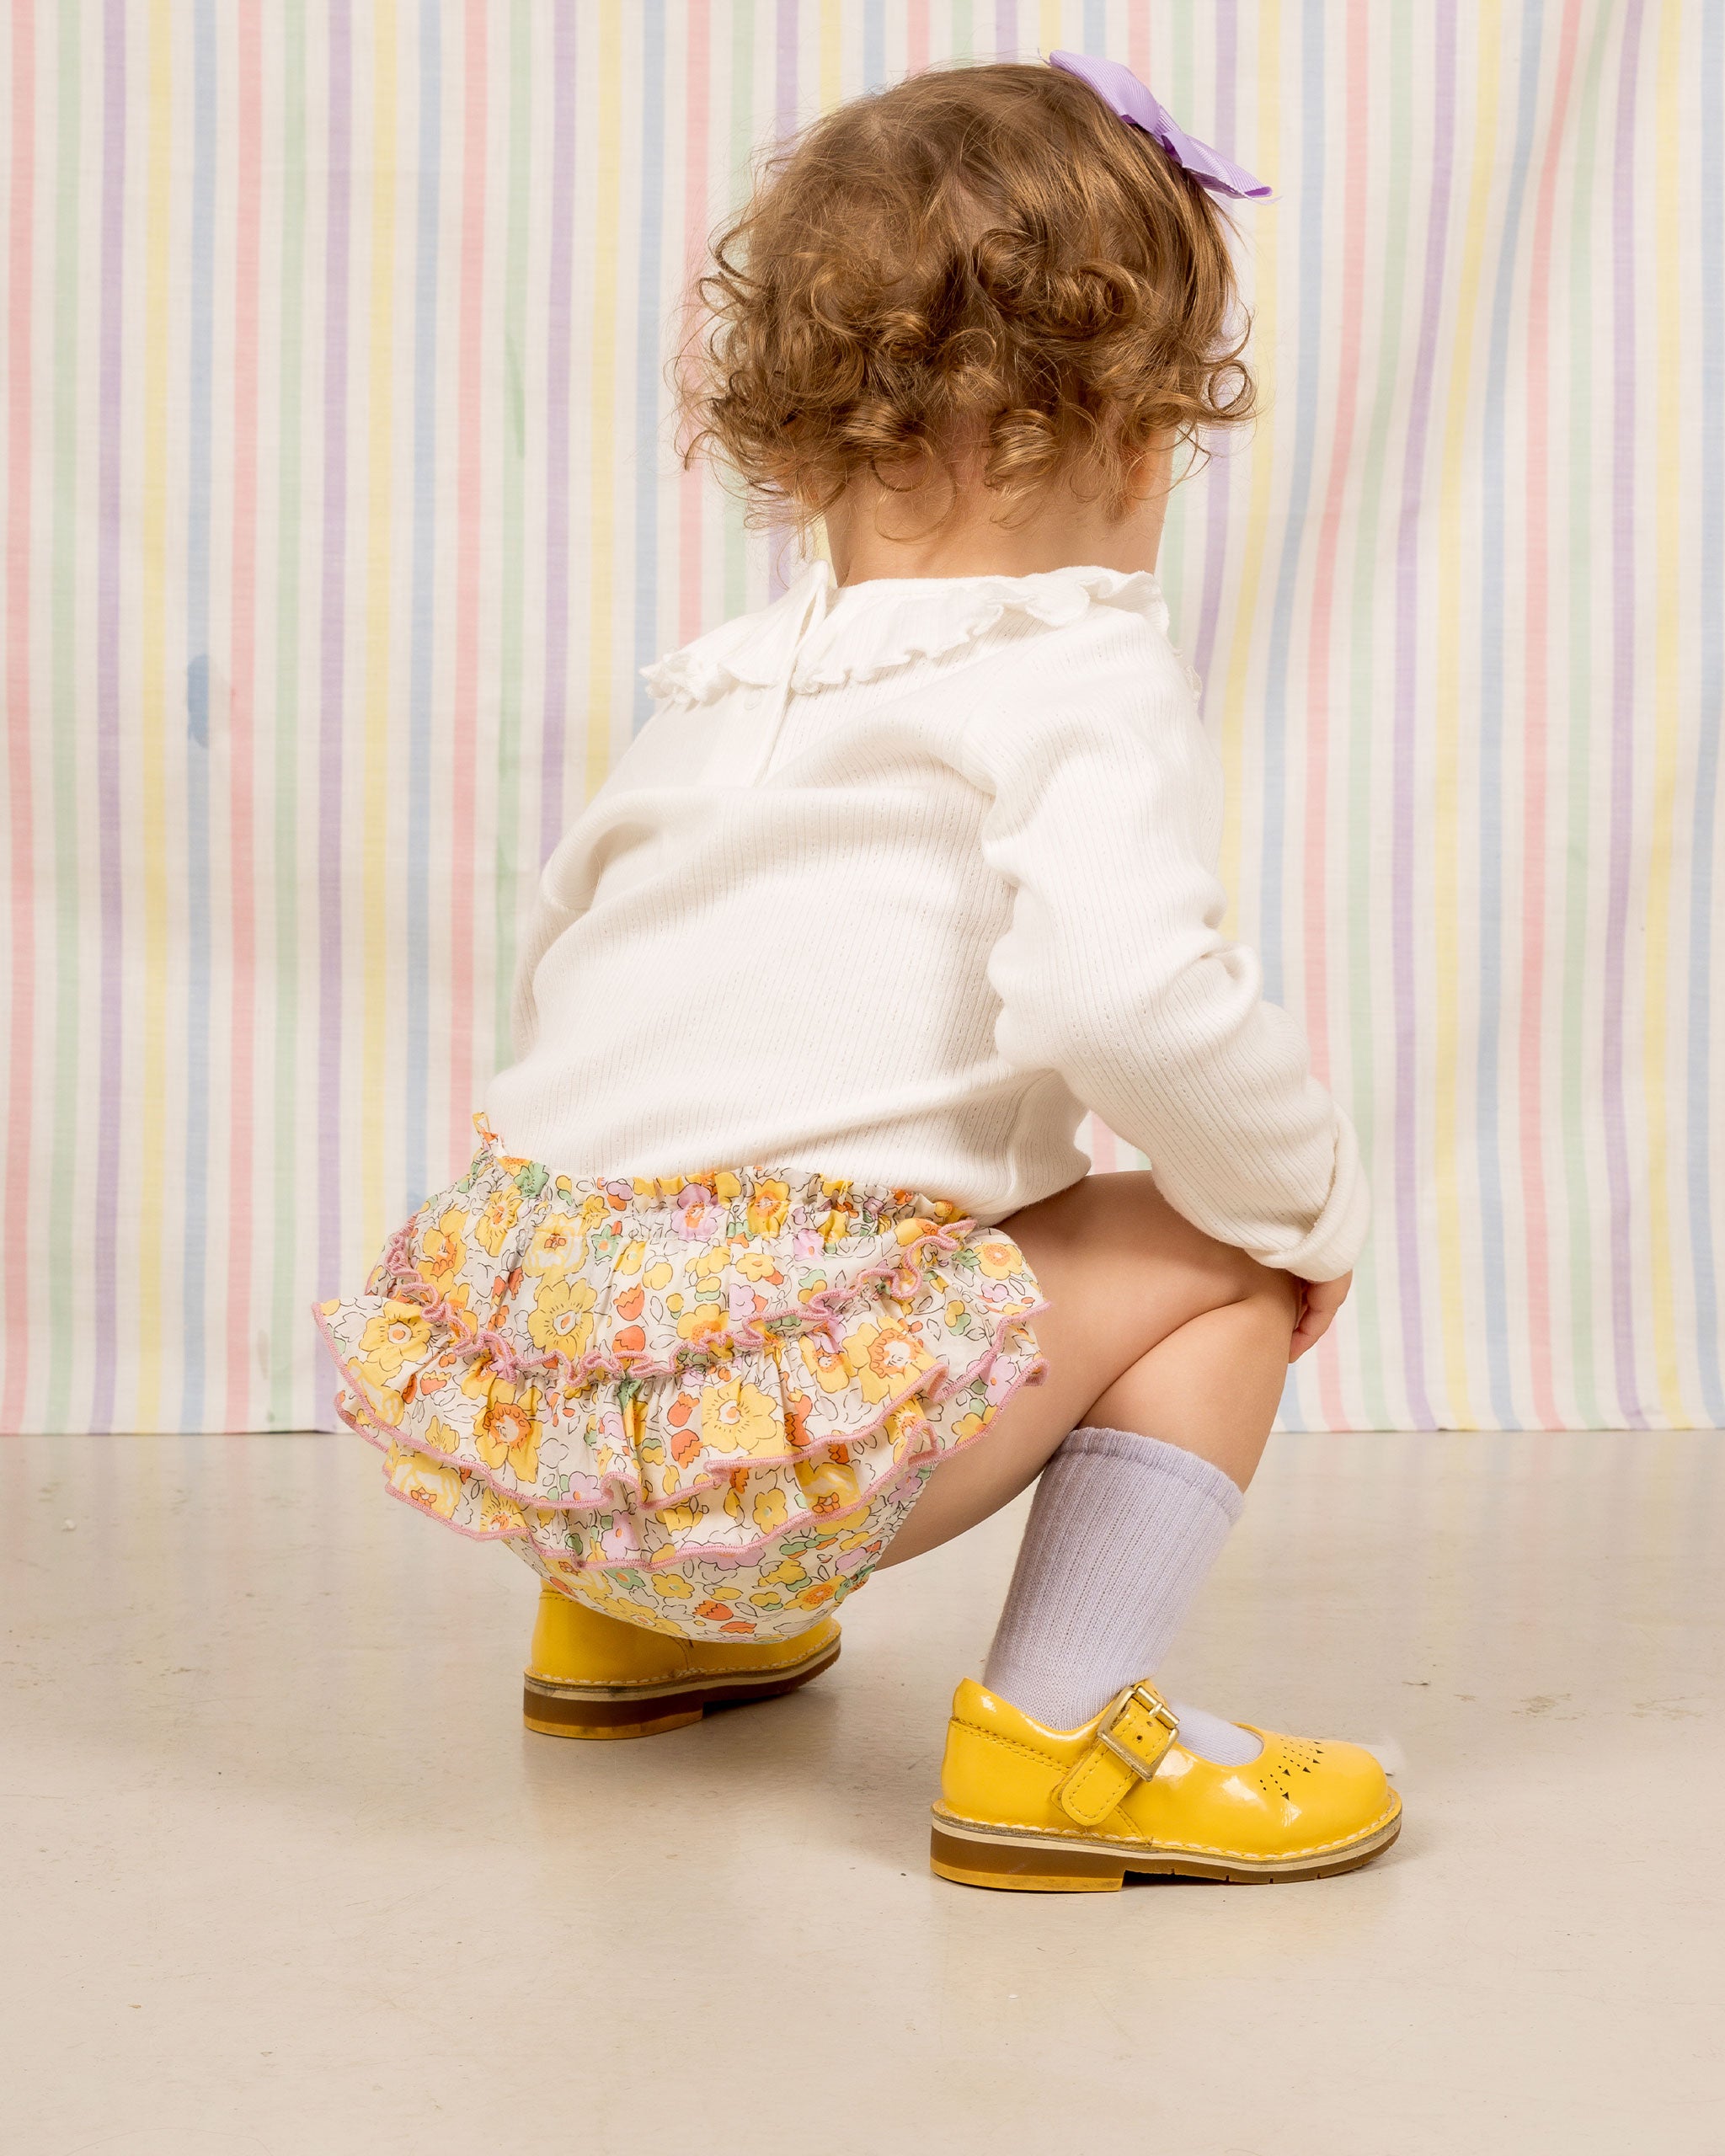 baby crouching in yellow floral bloomer